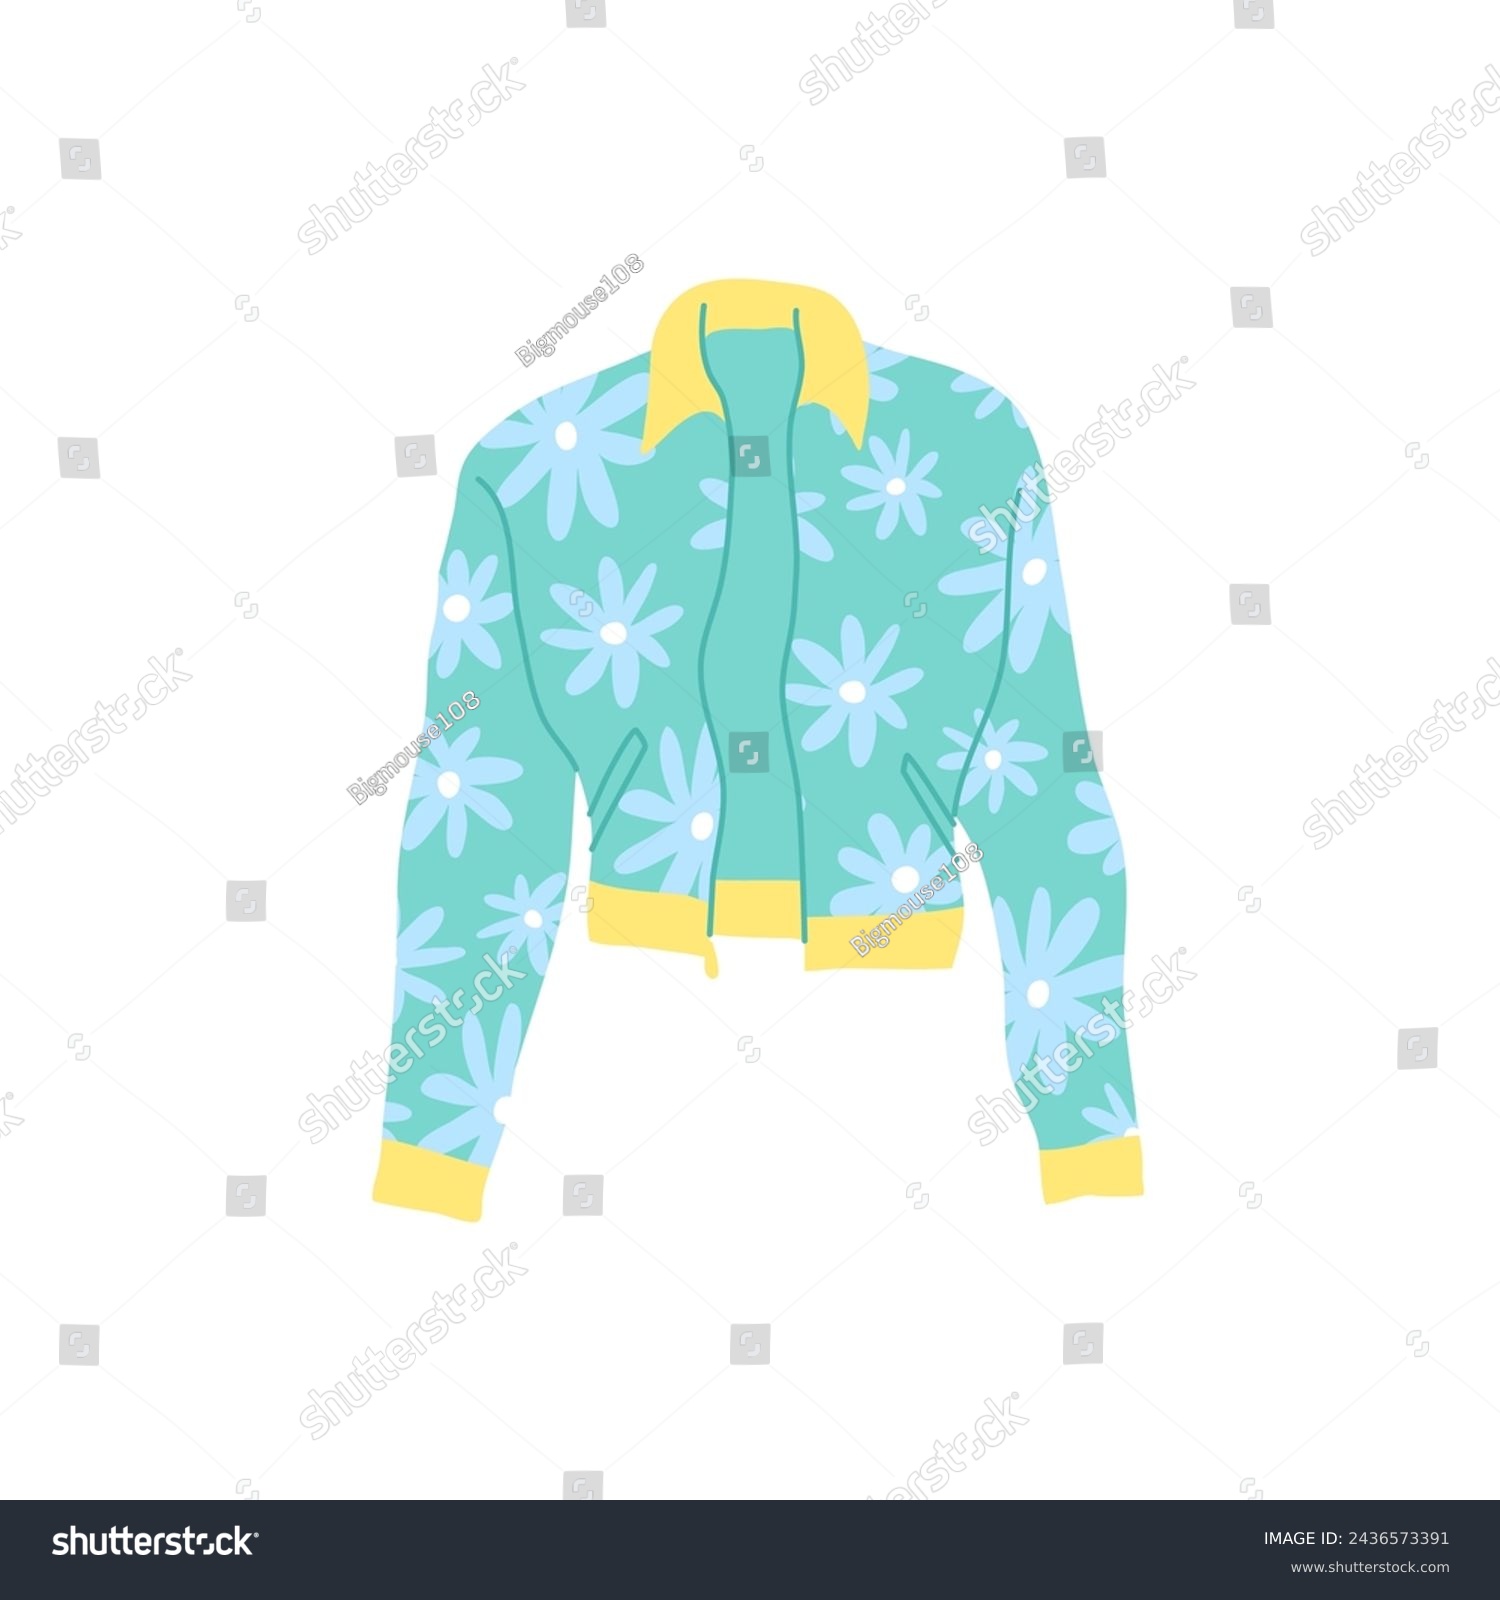 SVG of Cartoon Clothe Female Blue Yellow Jacket Flowers Print Concept Flat Design Style Isolated on a White Background. Vector illustration svg